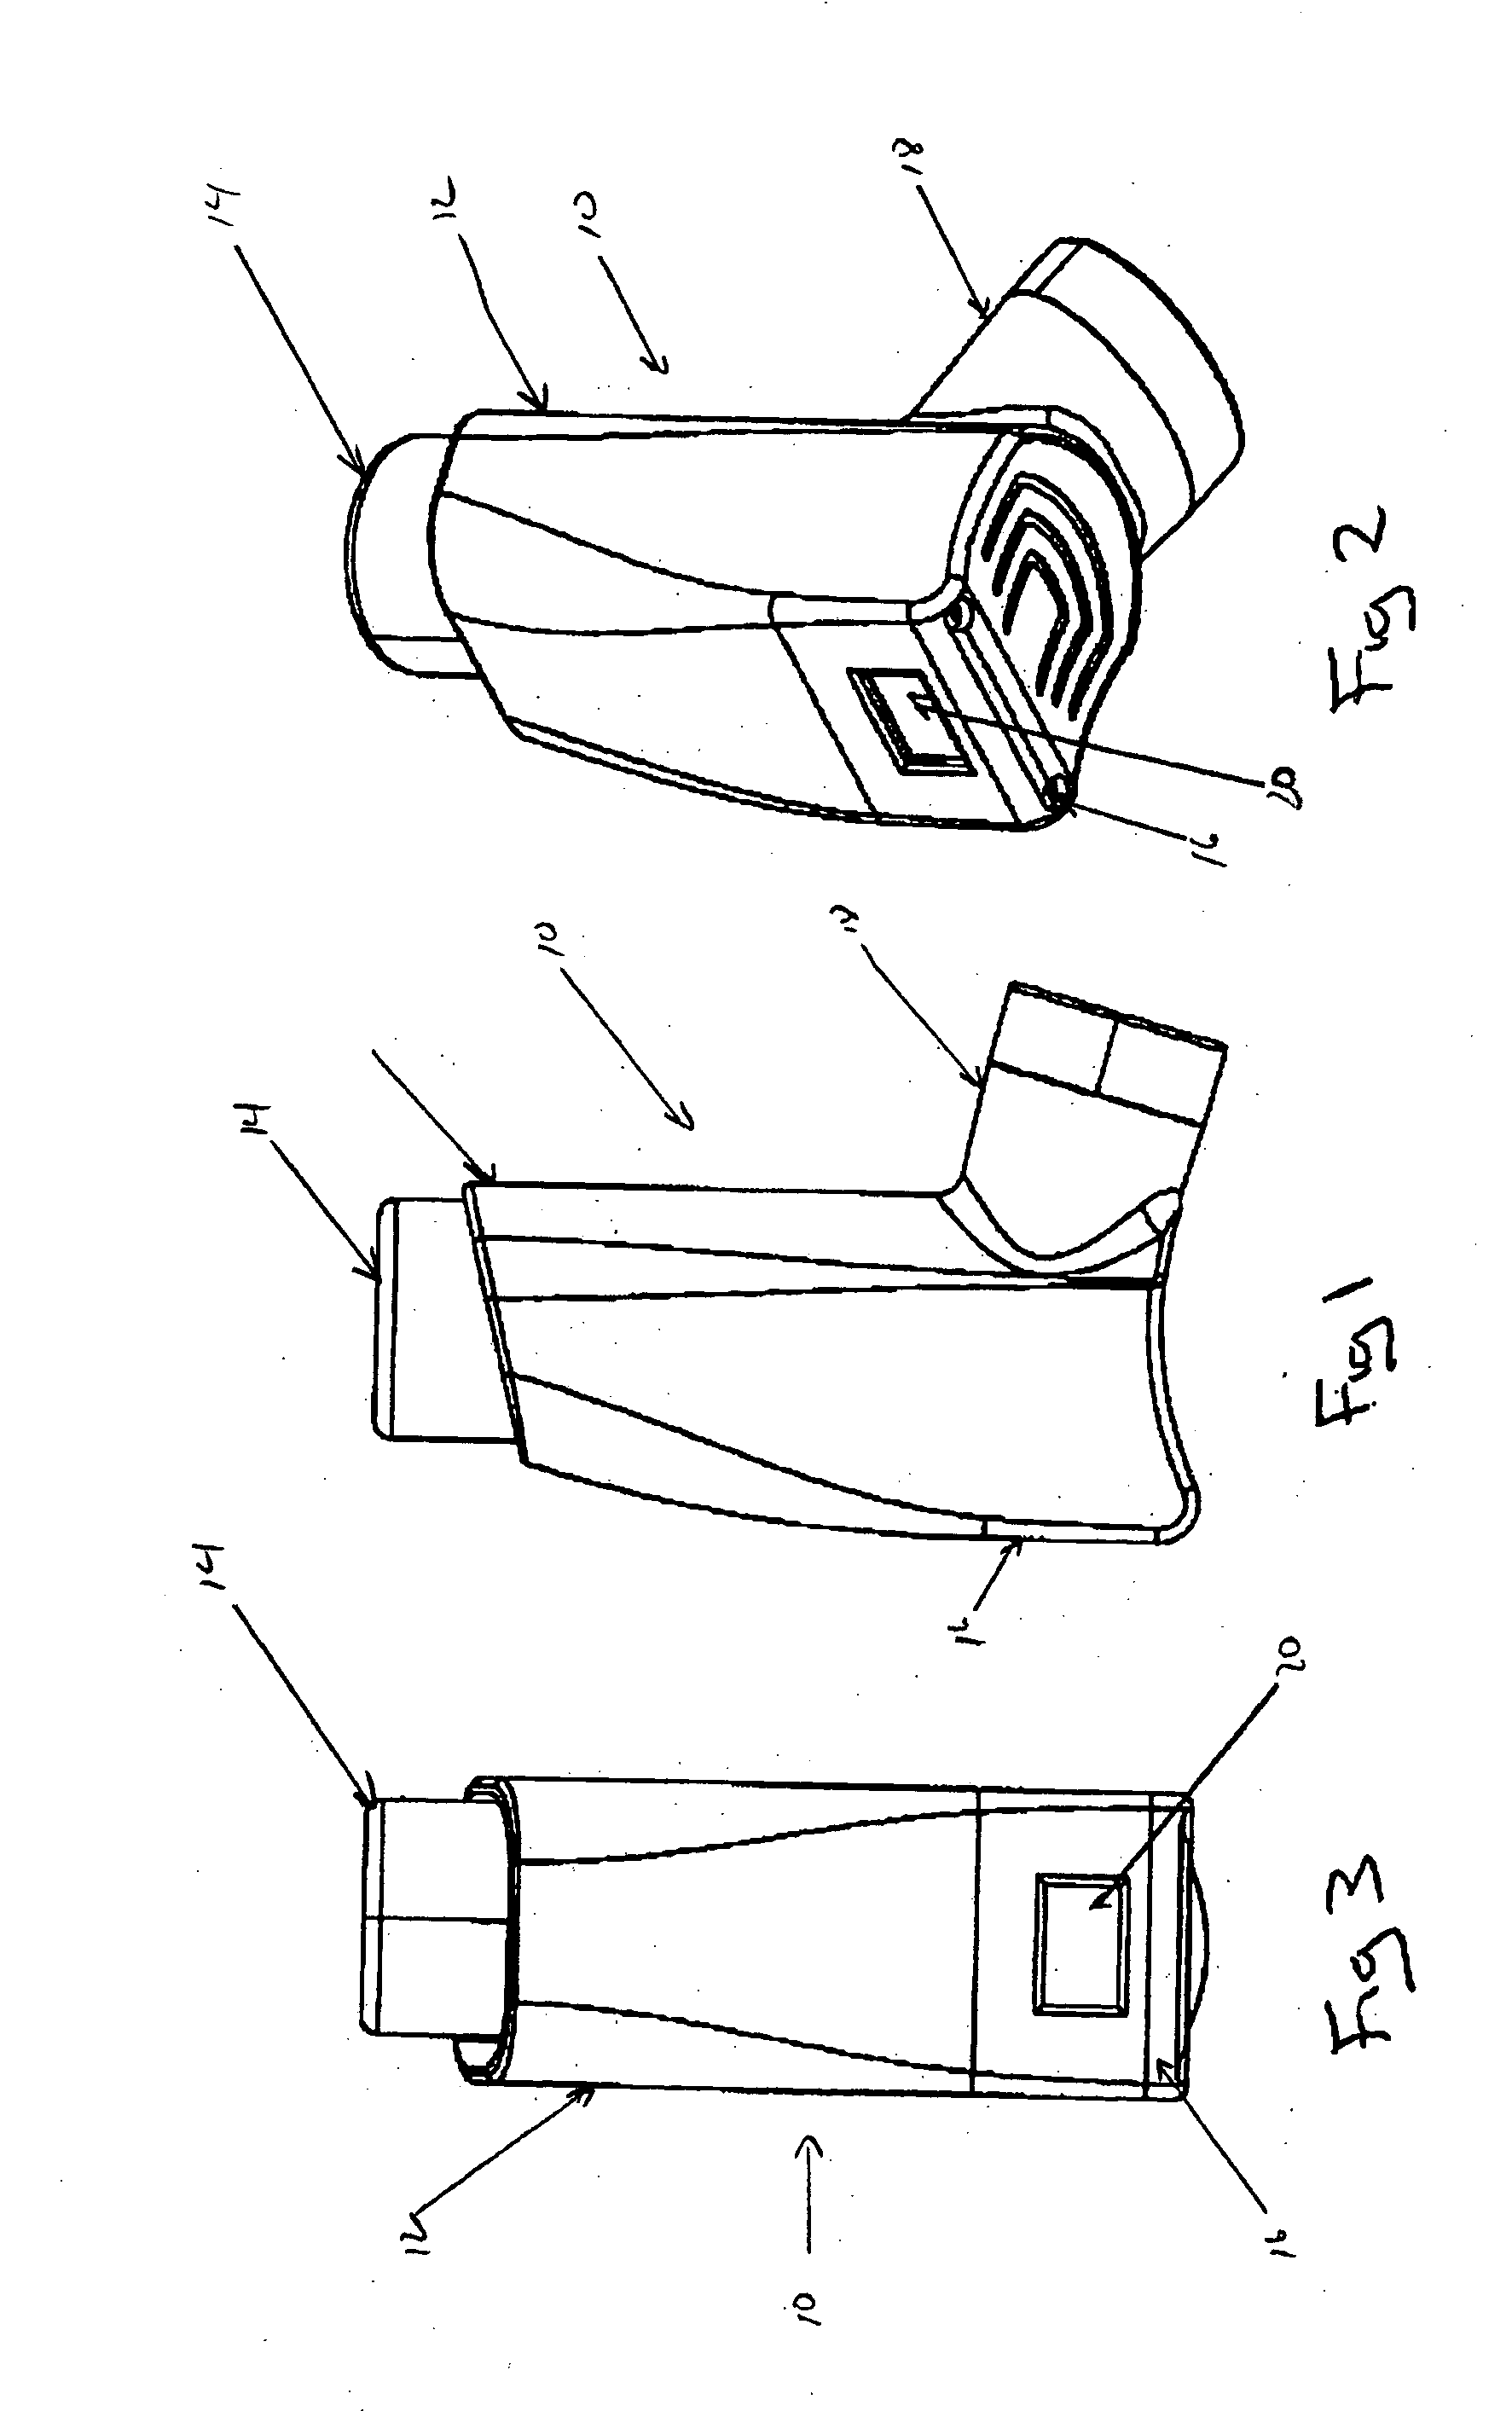 Apparatus for electronic dosage counter